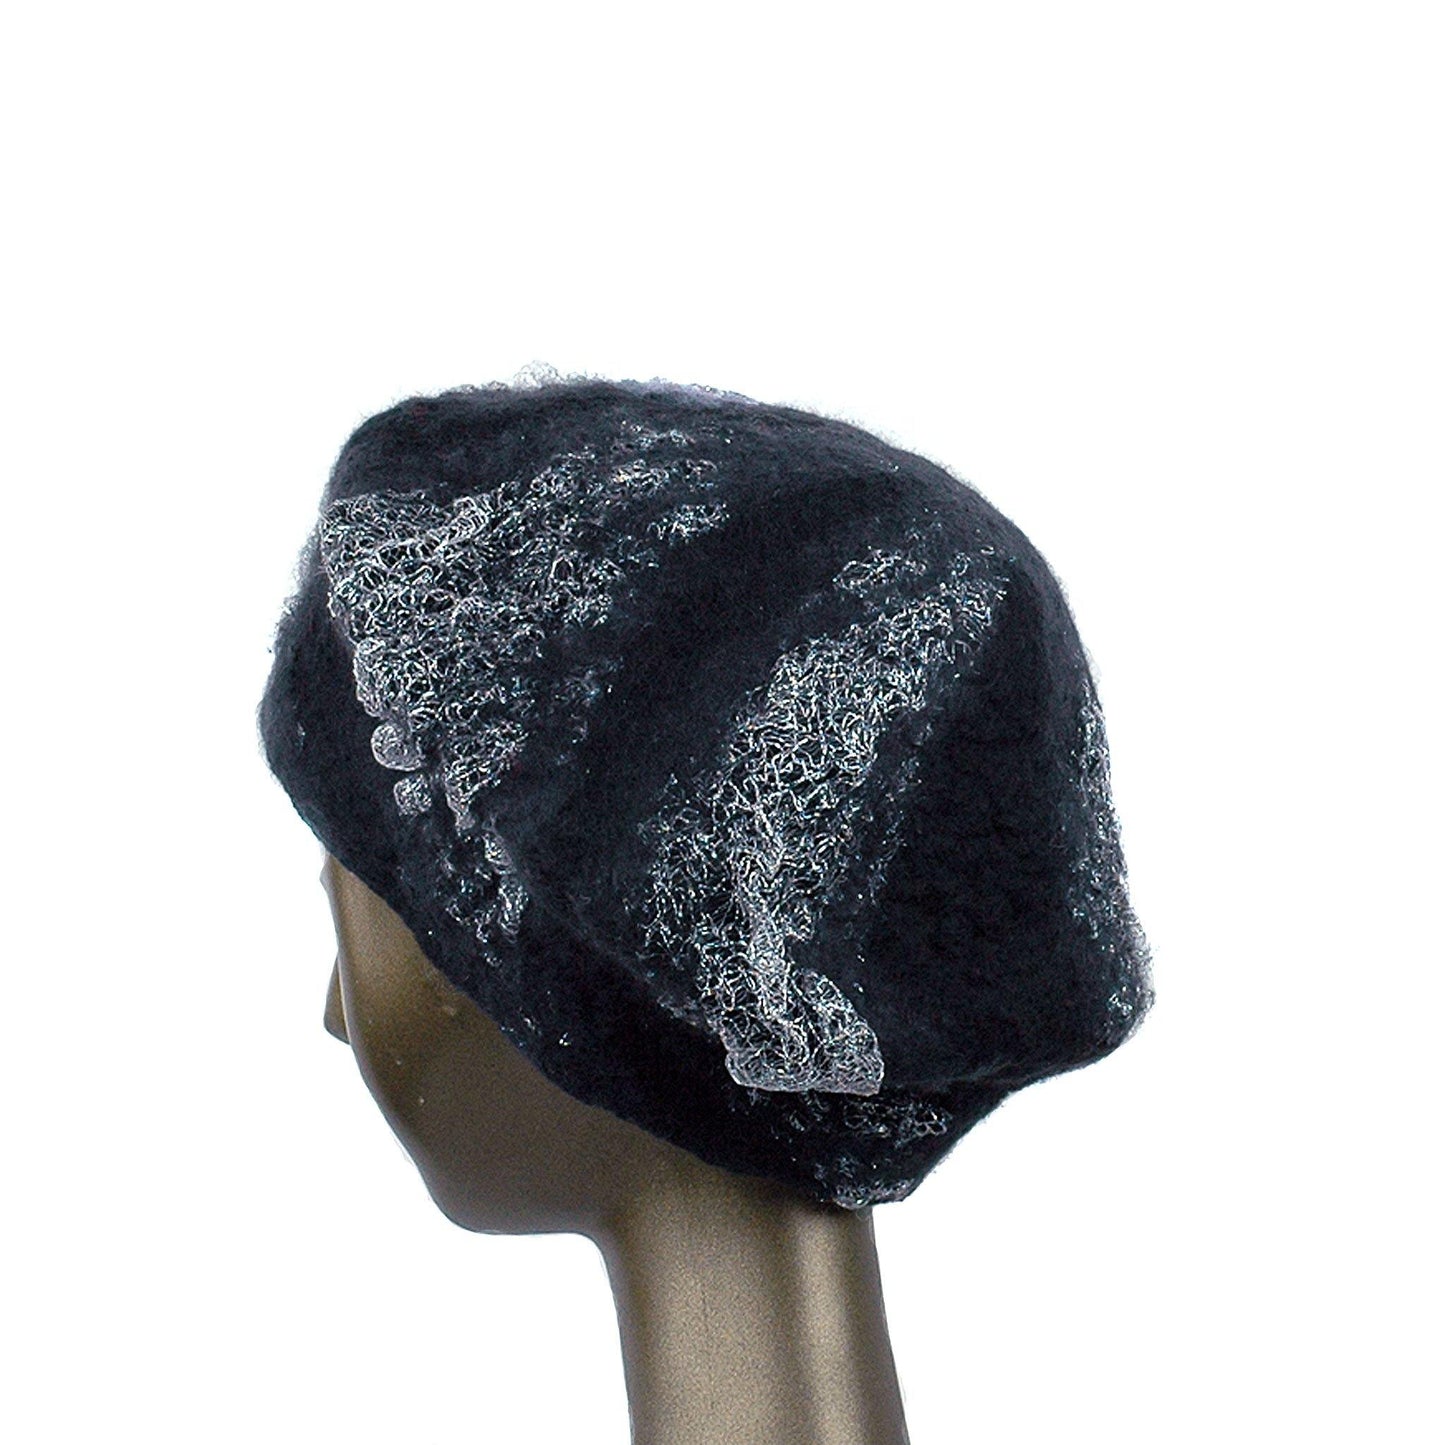 Charcoal Black Beret with Silver Nunofelt - back view